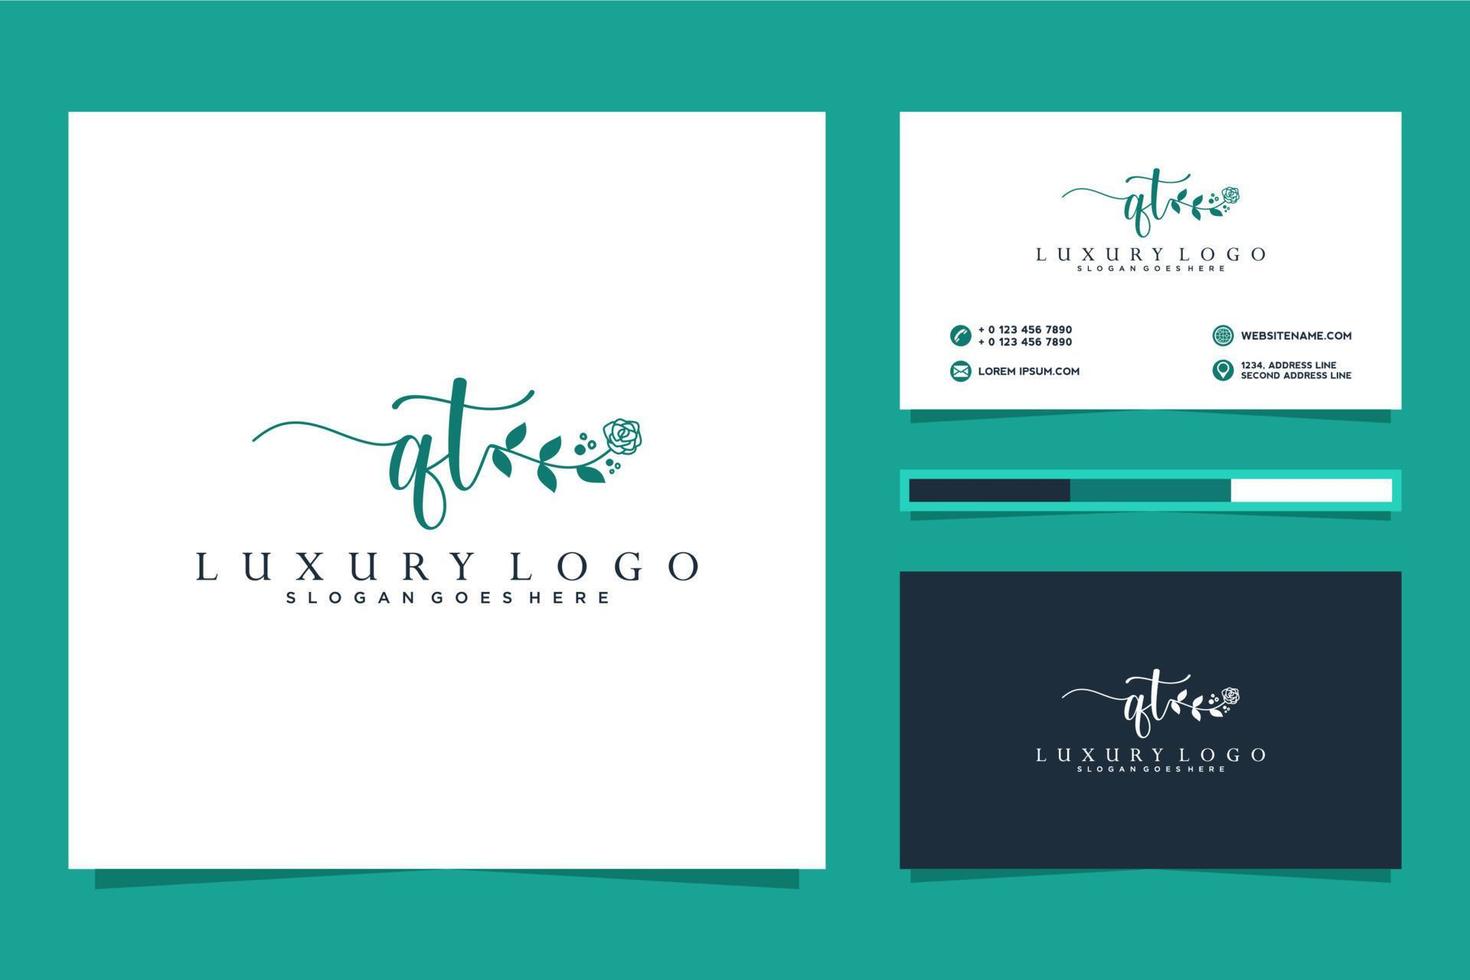 Initial QT Feminine logo collections and business card template Premium Vector